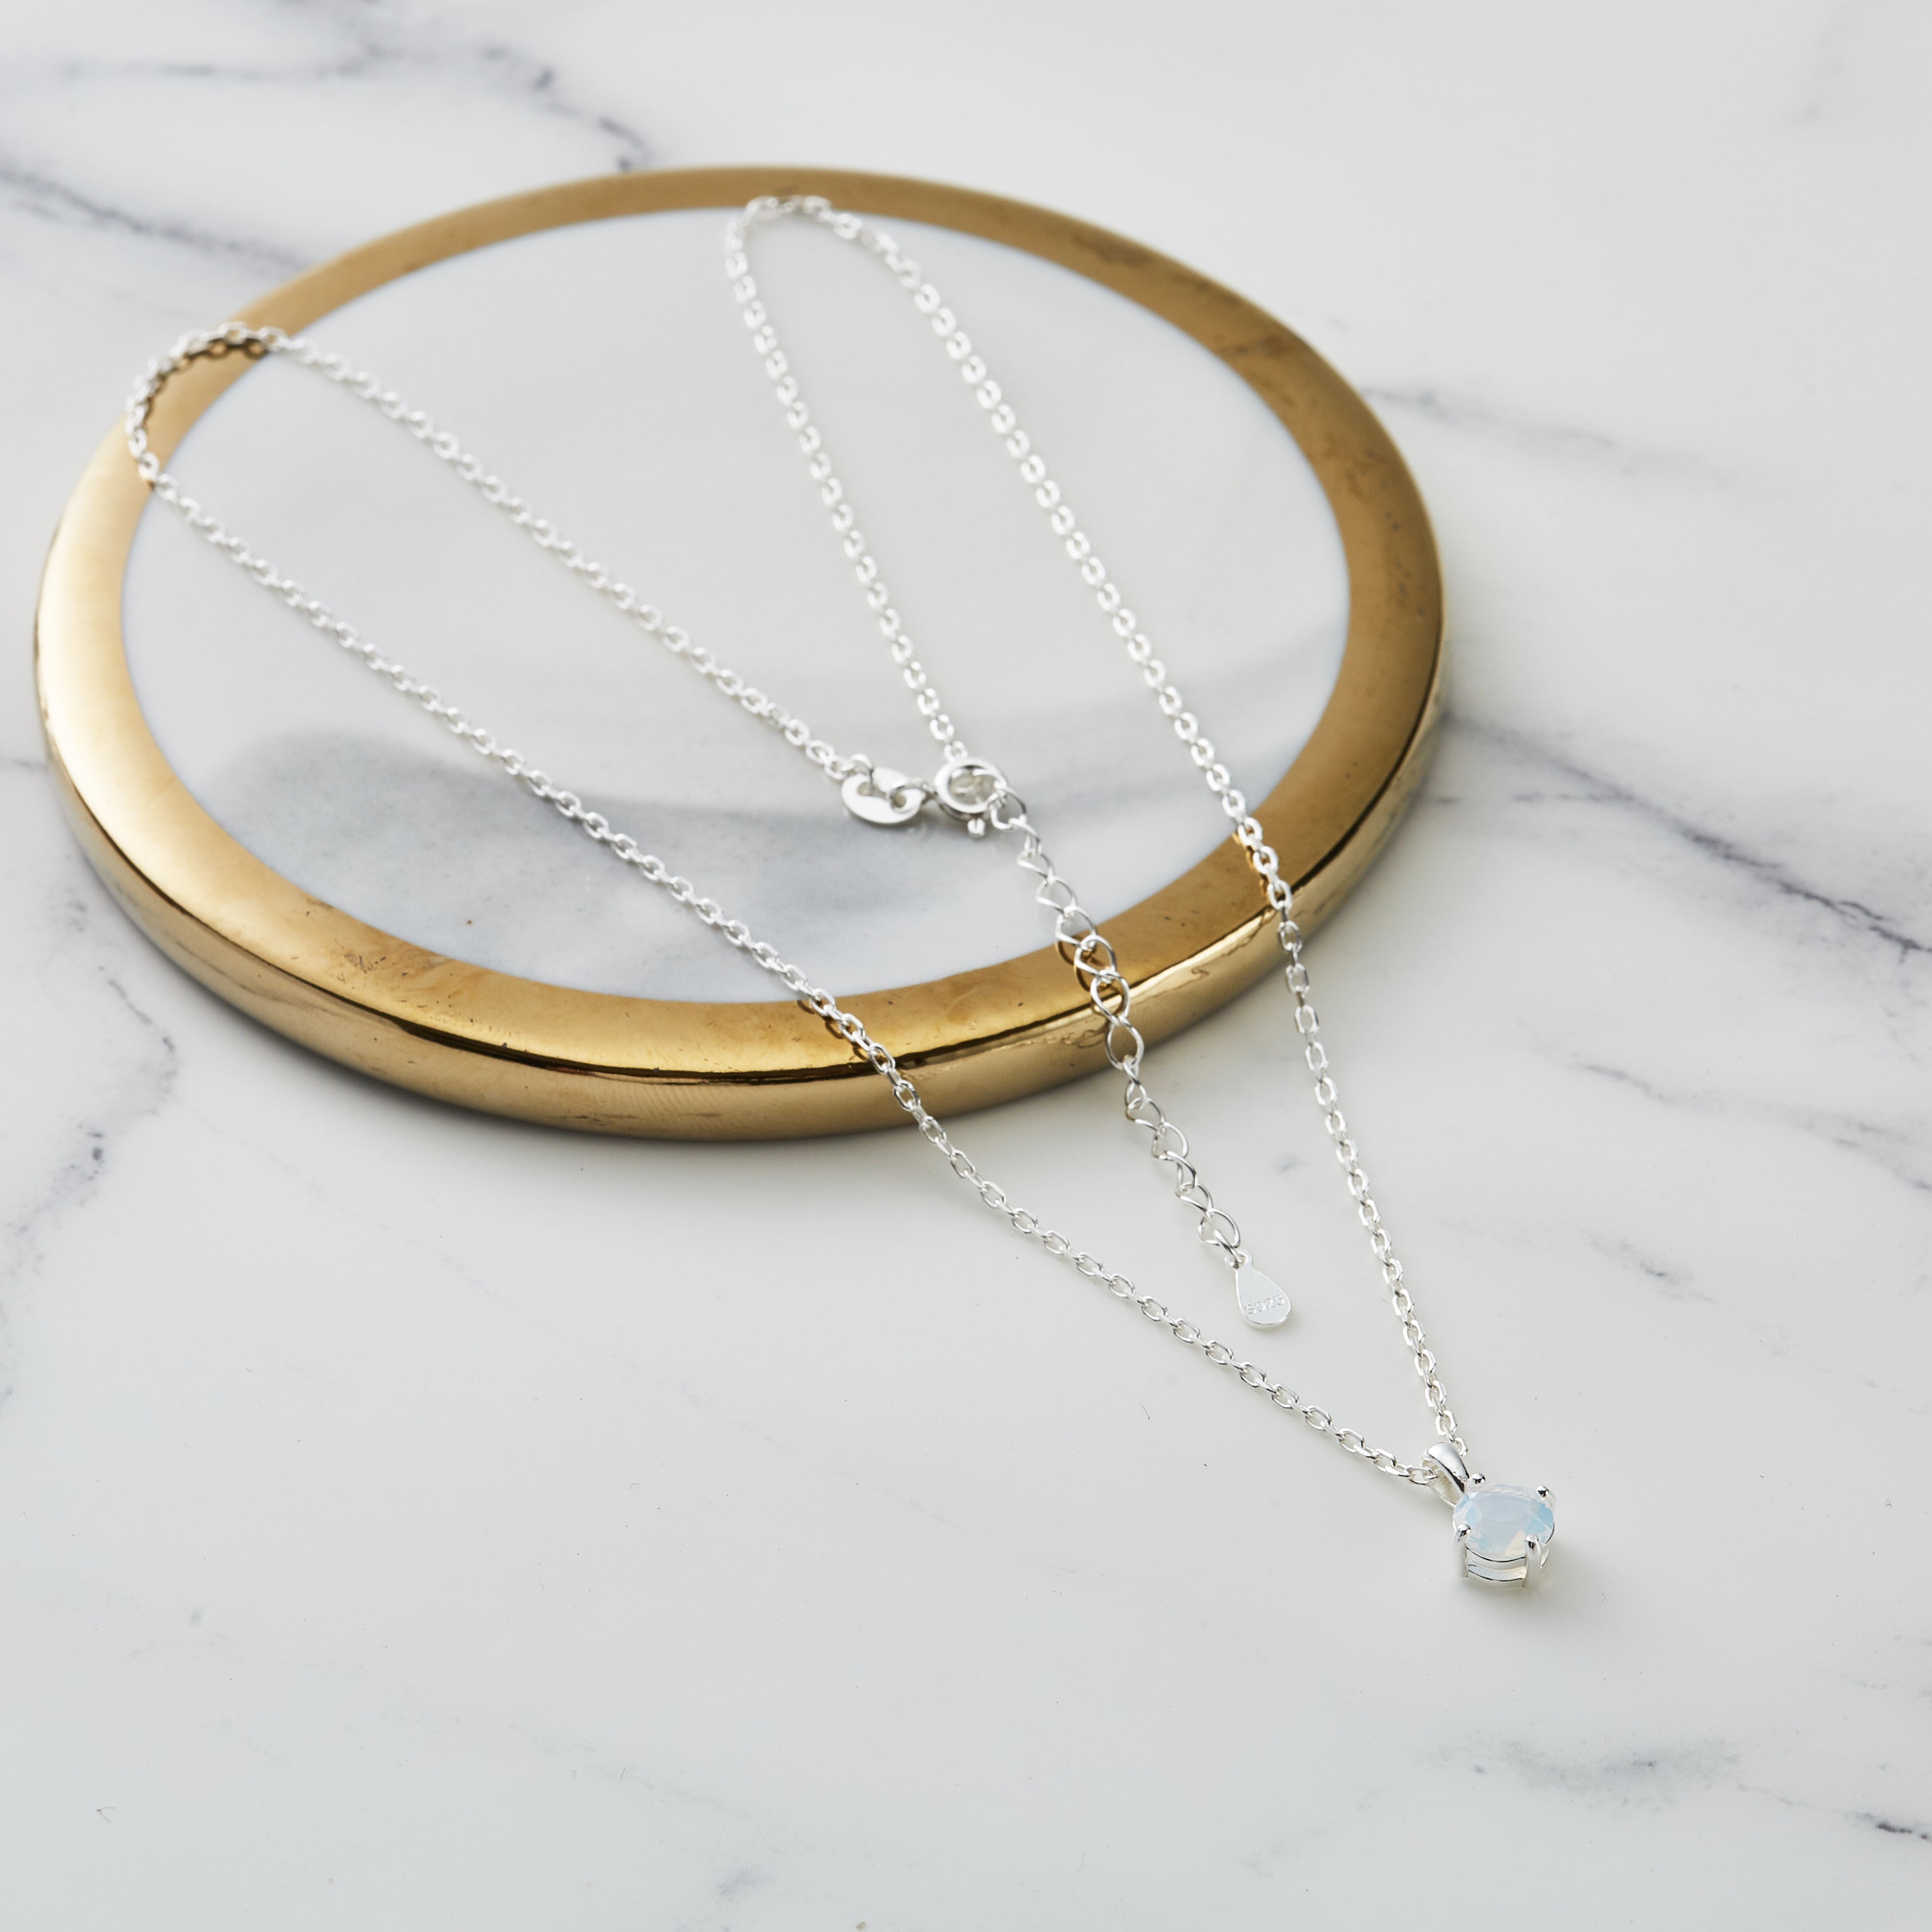 Sterling Silver October (Opal) Birthstone Necklace Created with Zircondia® Crystals